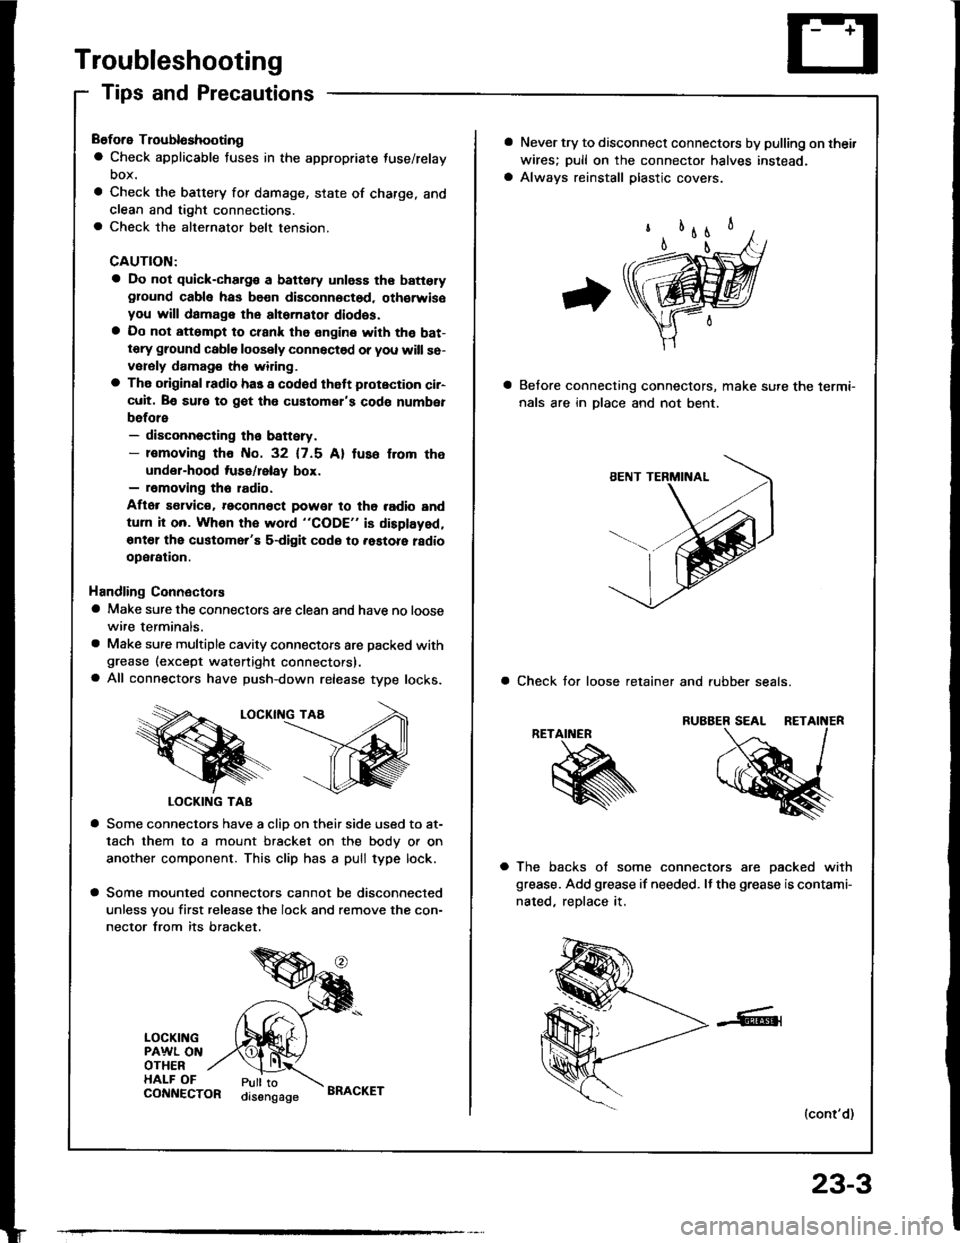 HONDA INTEGRA 1994 4.G Owners Guide Troubleshooting
Tips and Precautions
Before Troubloshooting
a Check applicable fuses in the appropriate fuse/relay
DOX.
a Check the battery for damage, state of charge, and
clean and tight connections